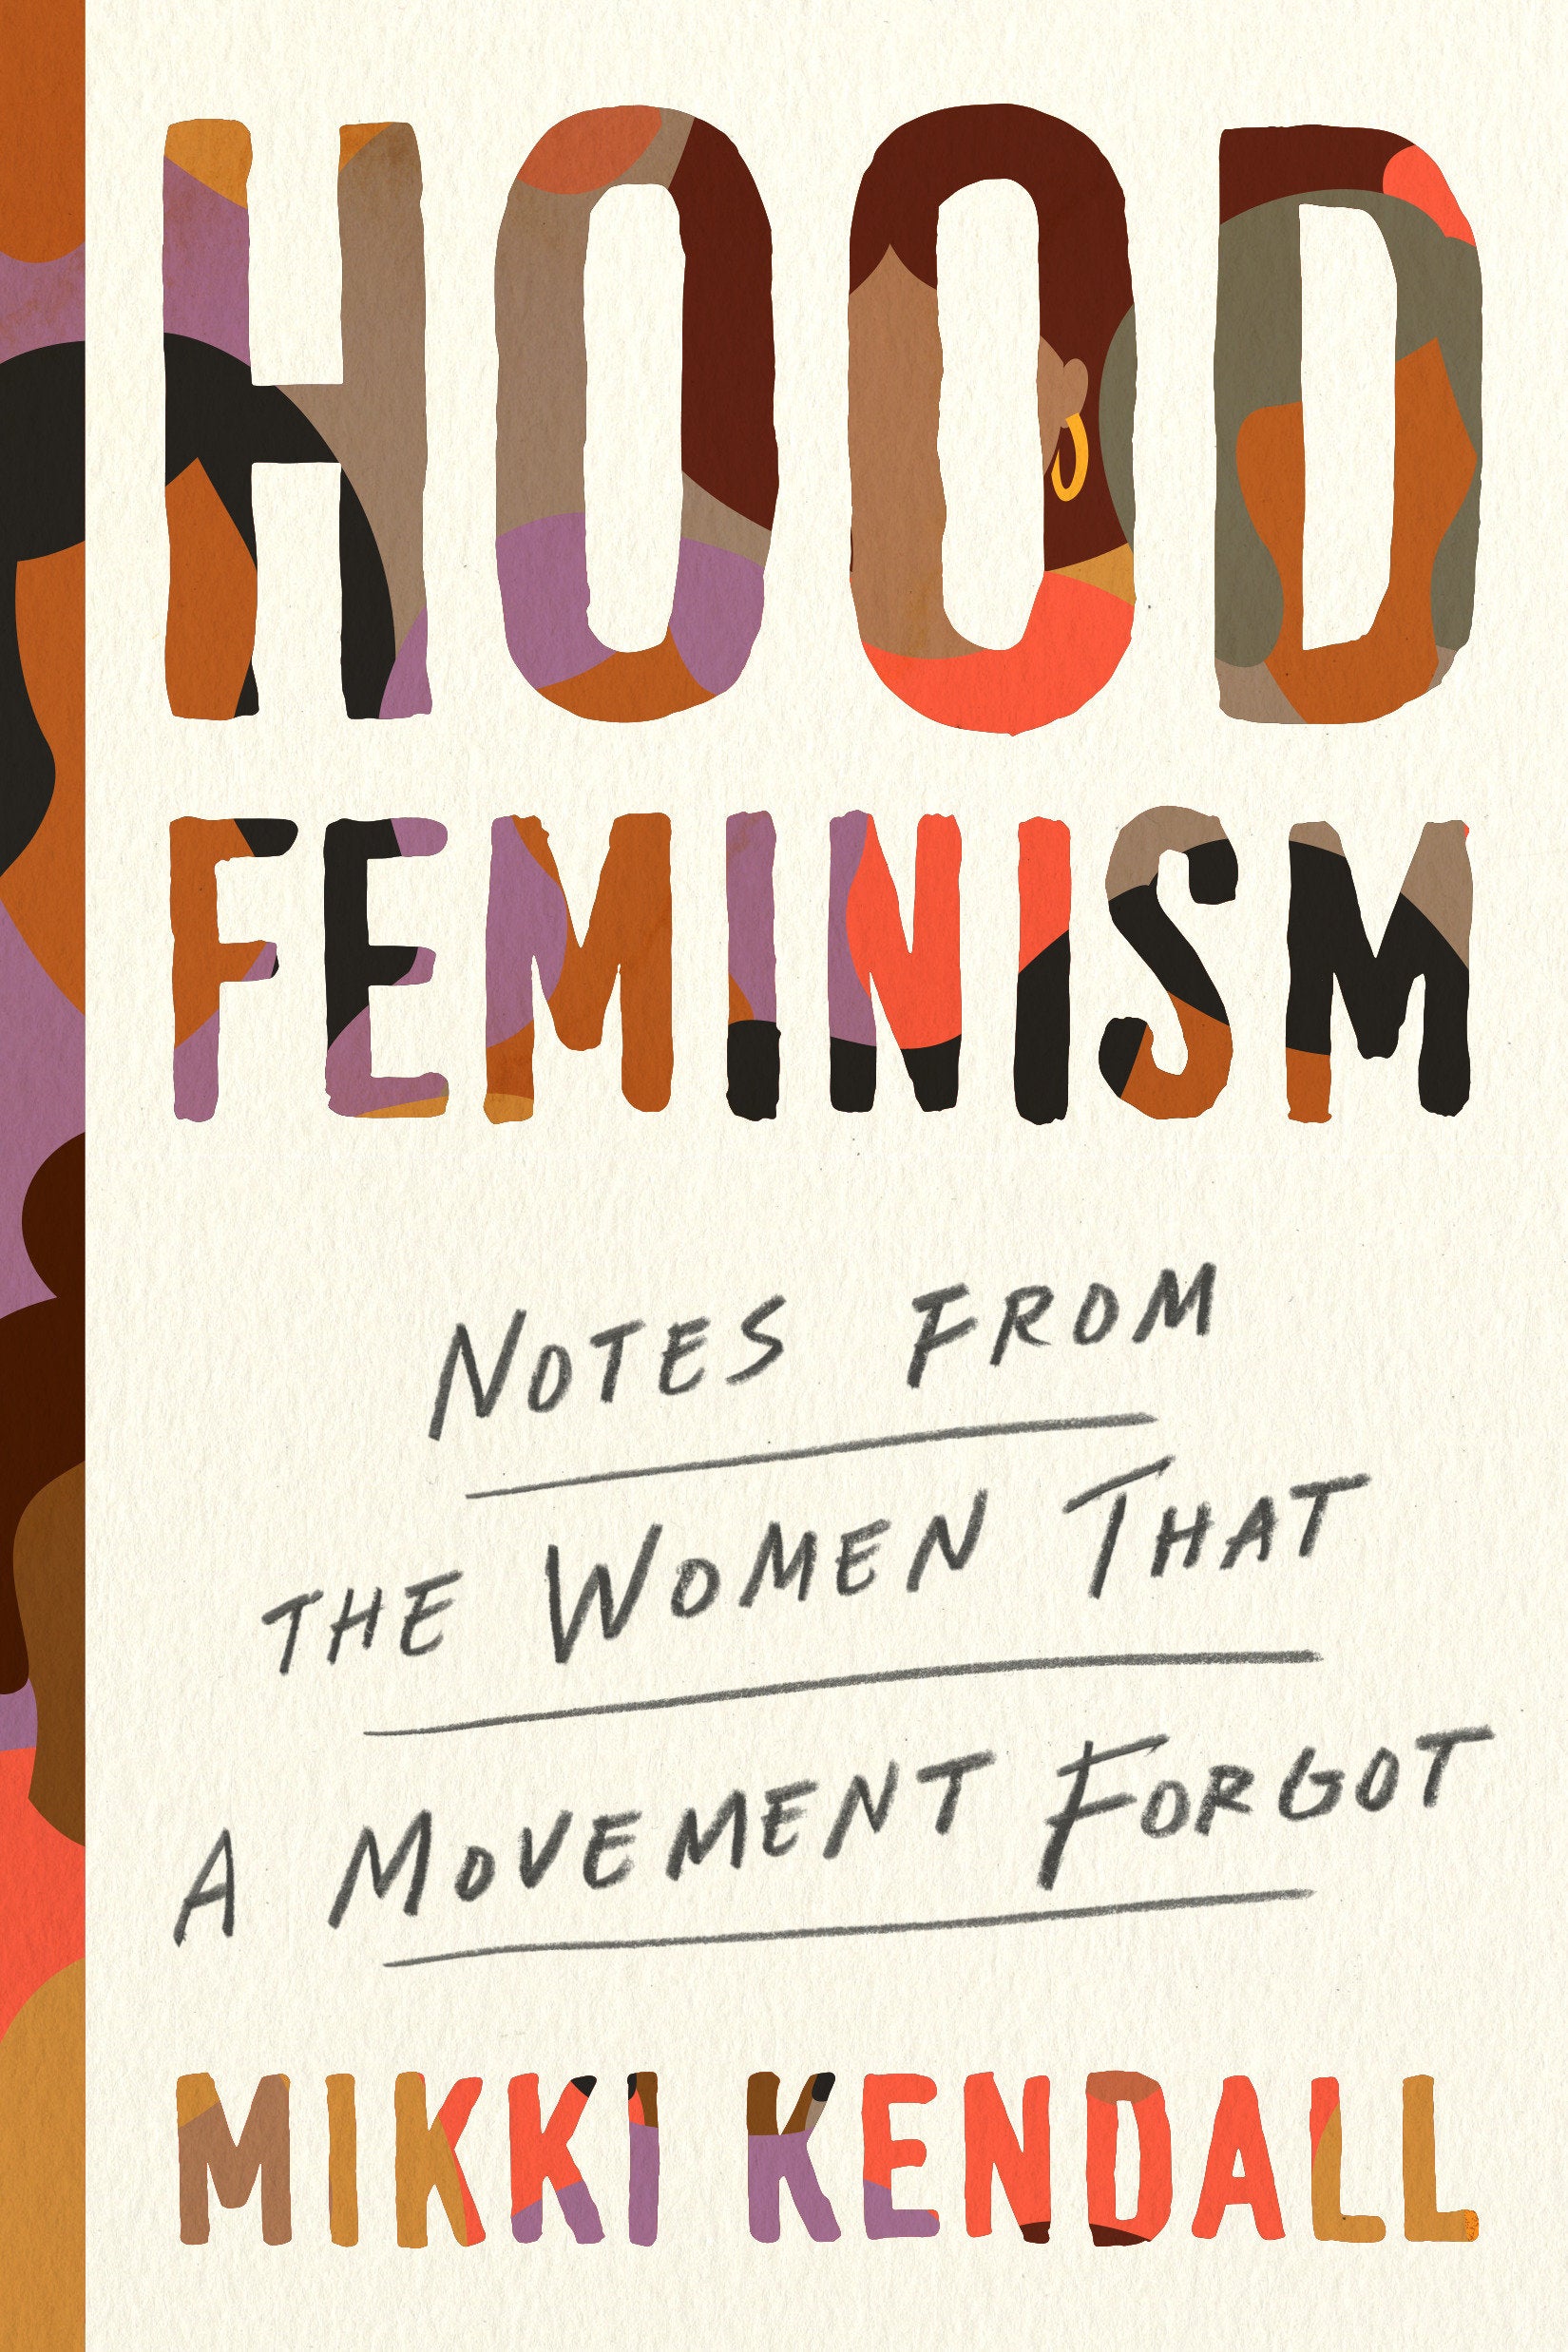 Hood Feminism // Notes from the Women That a Movement Forgot